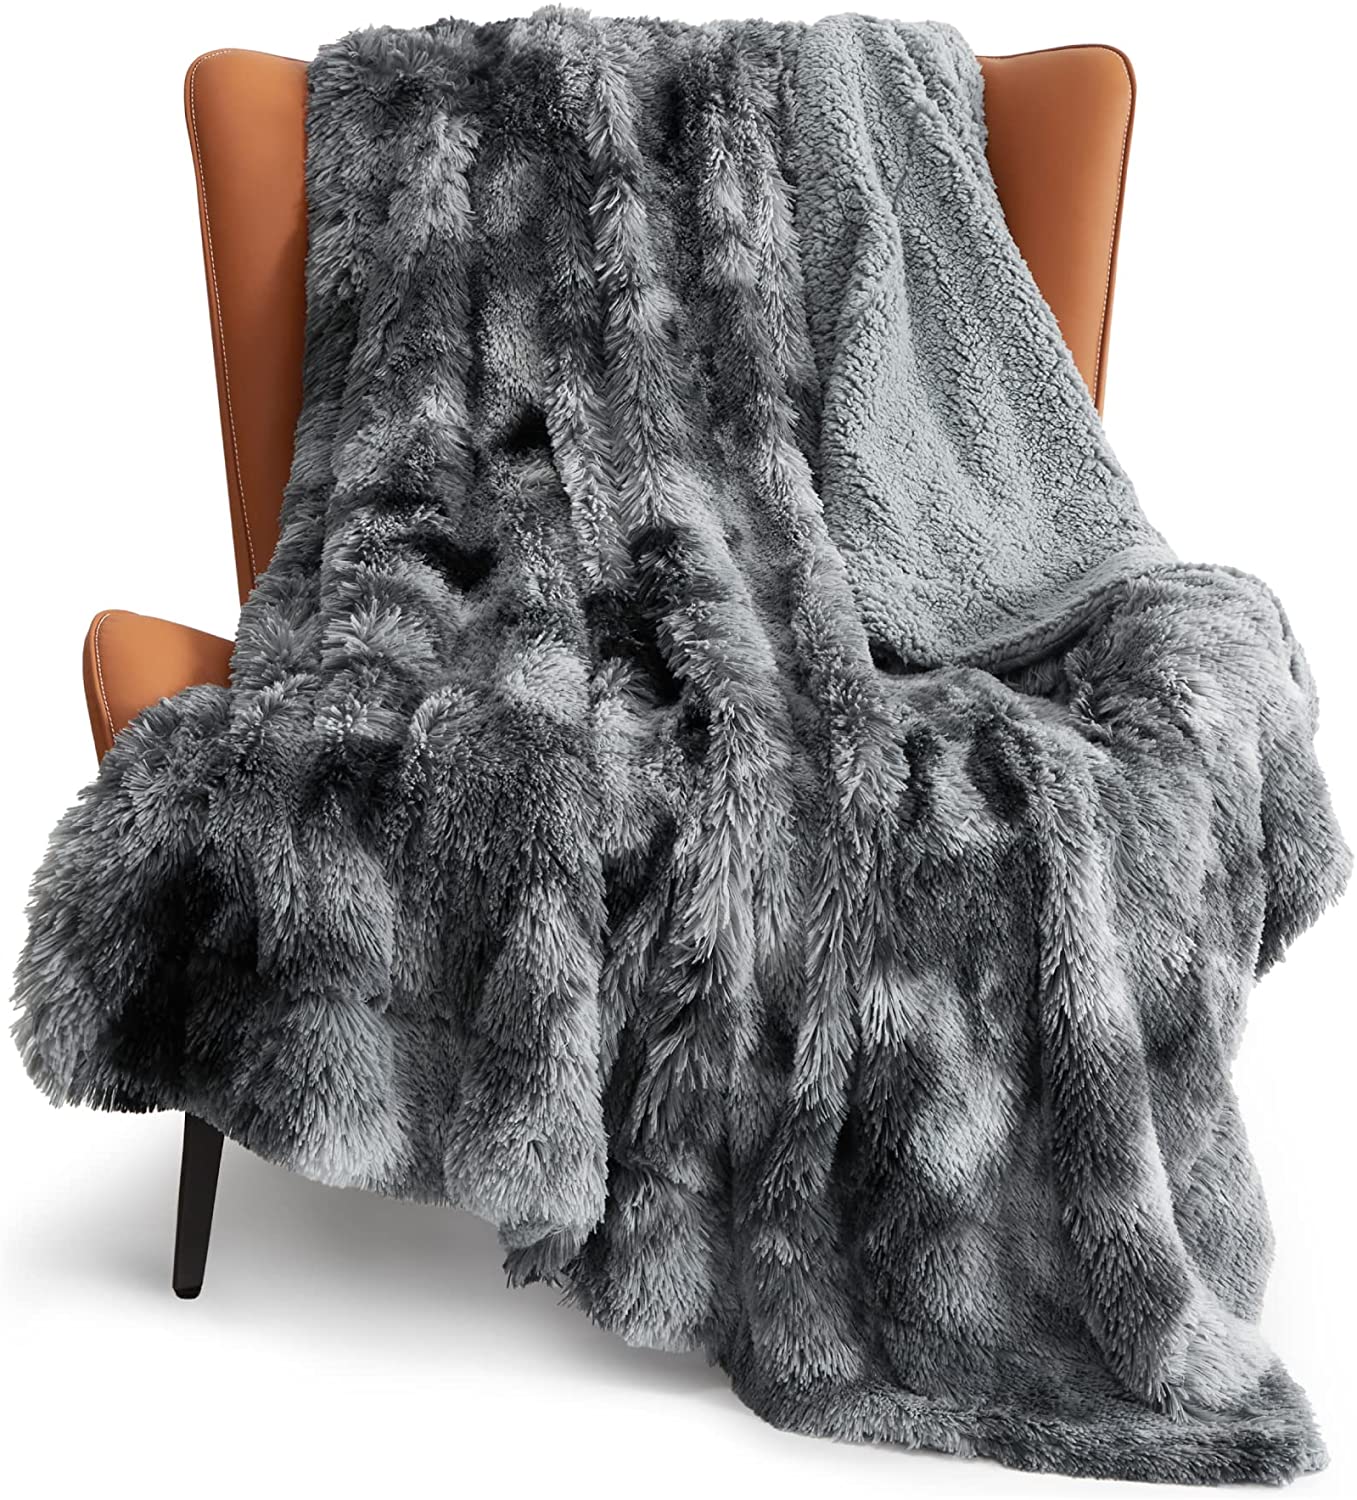 Funky Tie-dye Super Soft Lightweight Warm Throw Blanket for Couch Sofa Bed Chair 